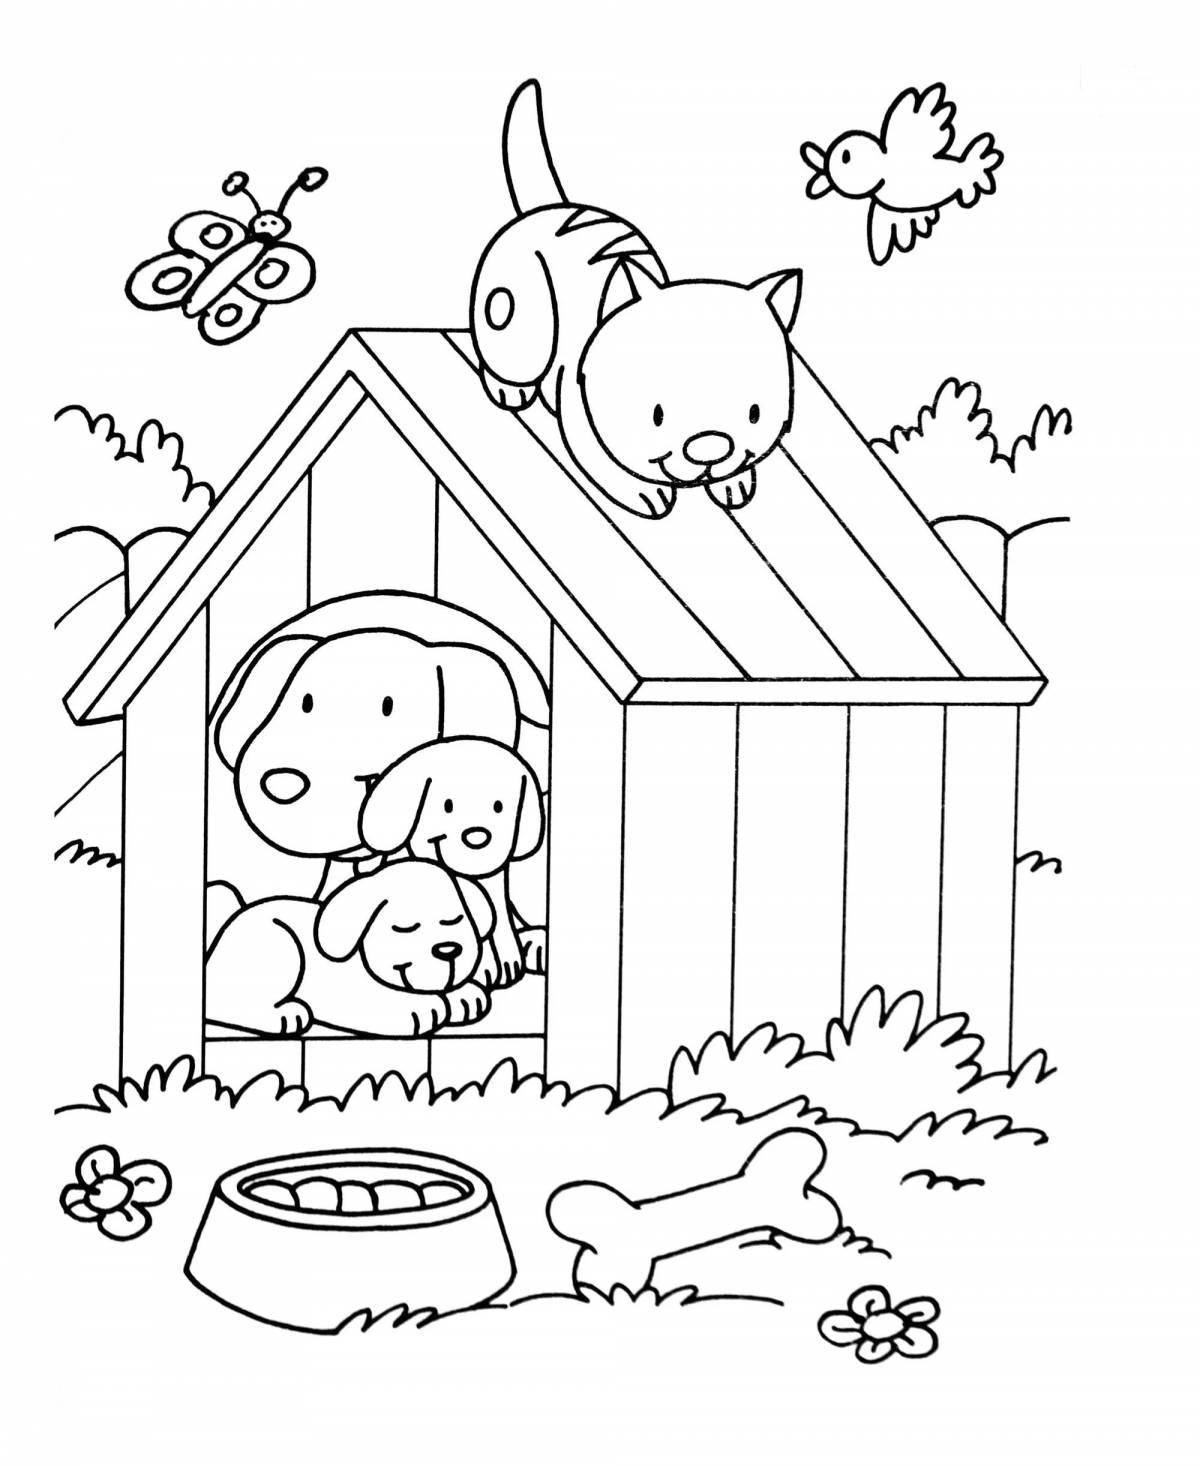 Coloring page calm animal house